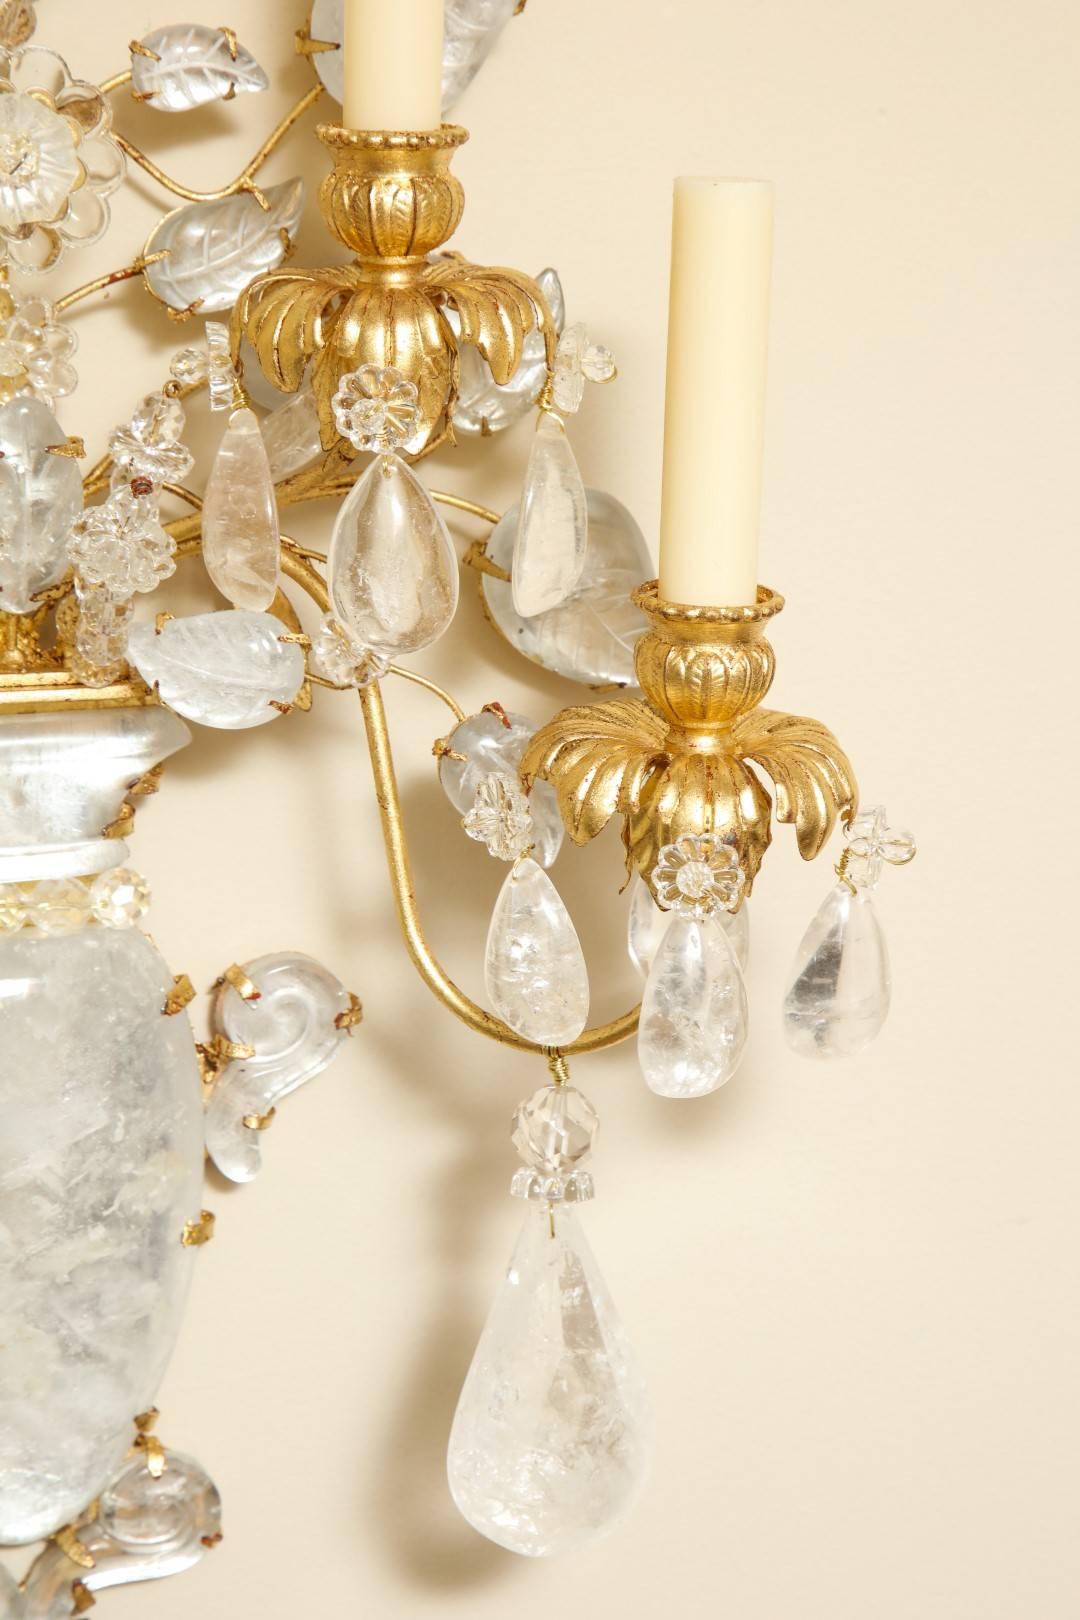 North American Pair of New Rock Crystal Sconces